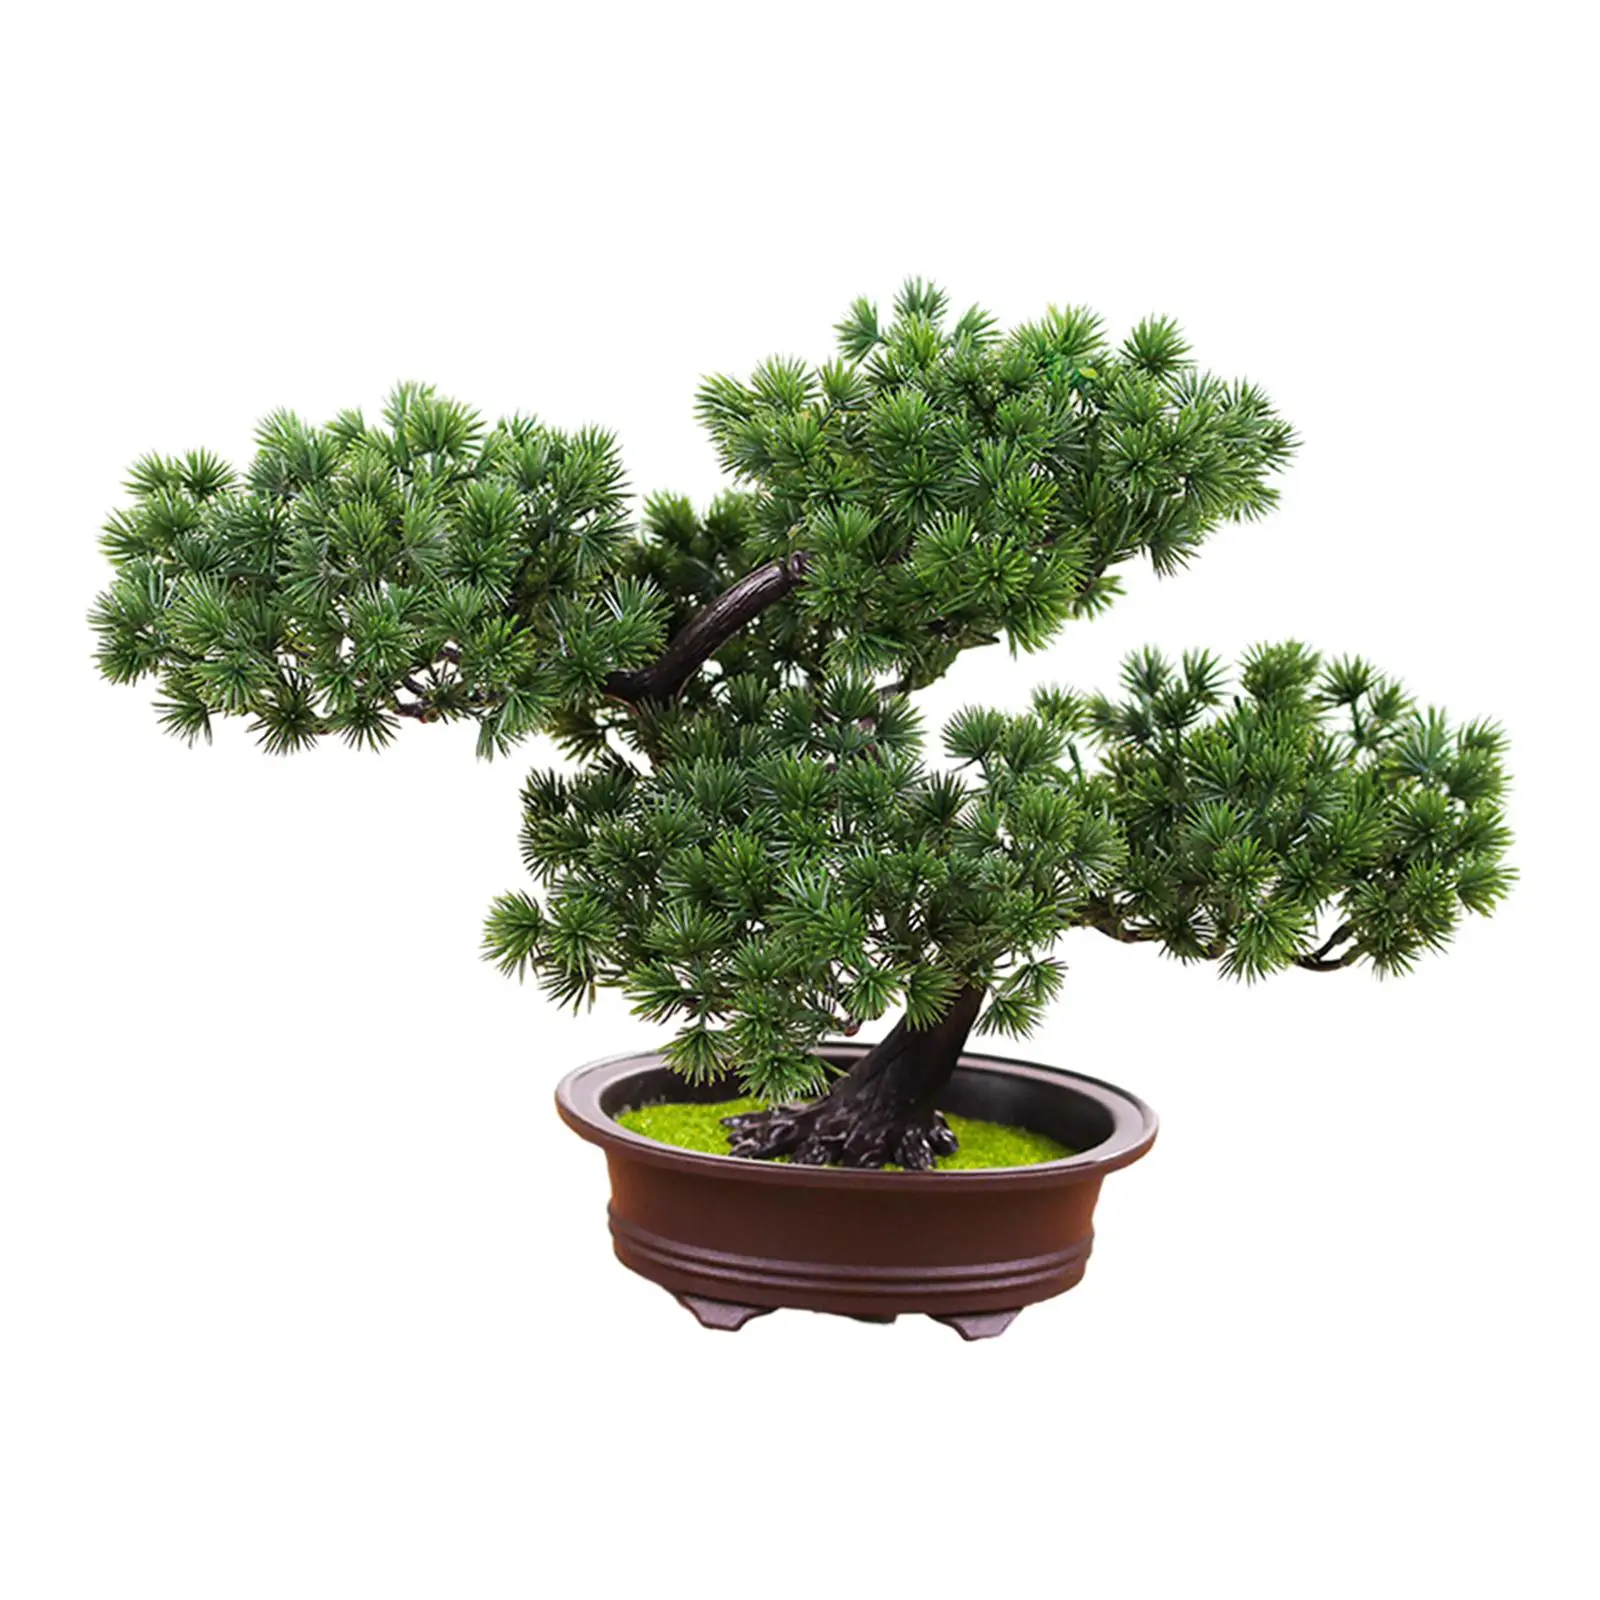 Artificial Potted Plants Welcoming Pine Tree Desktop Display Tabletop Decoration